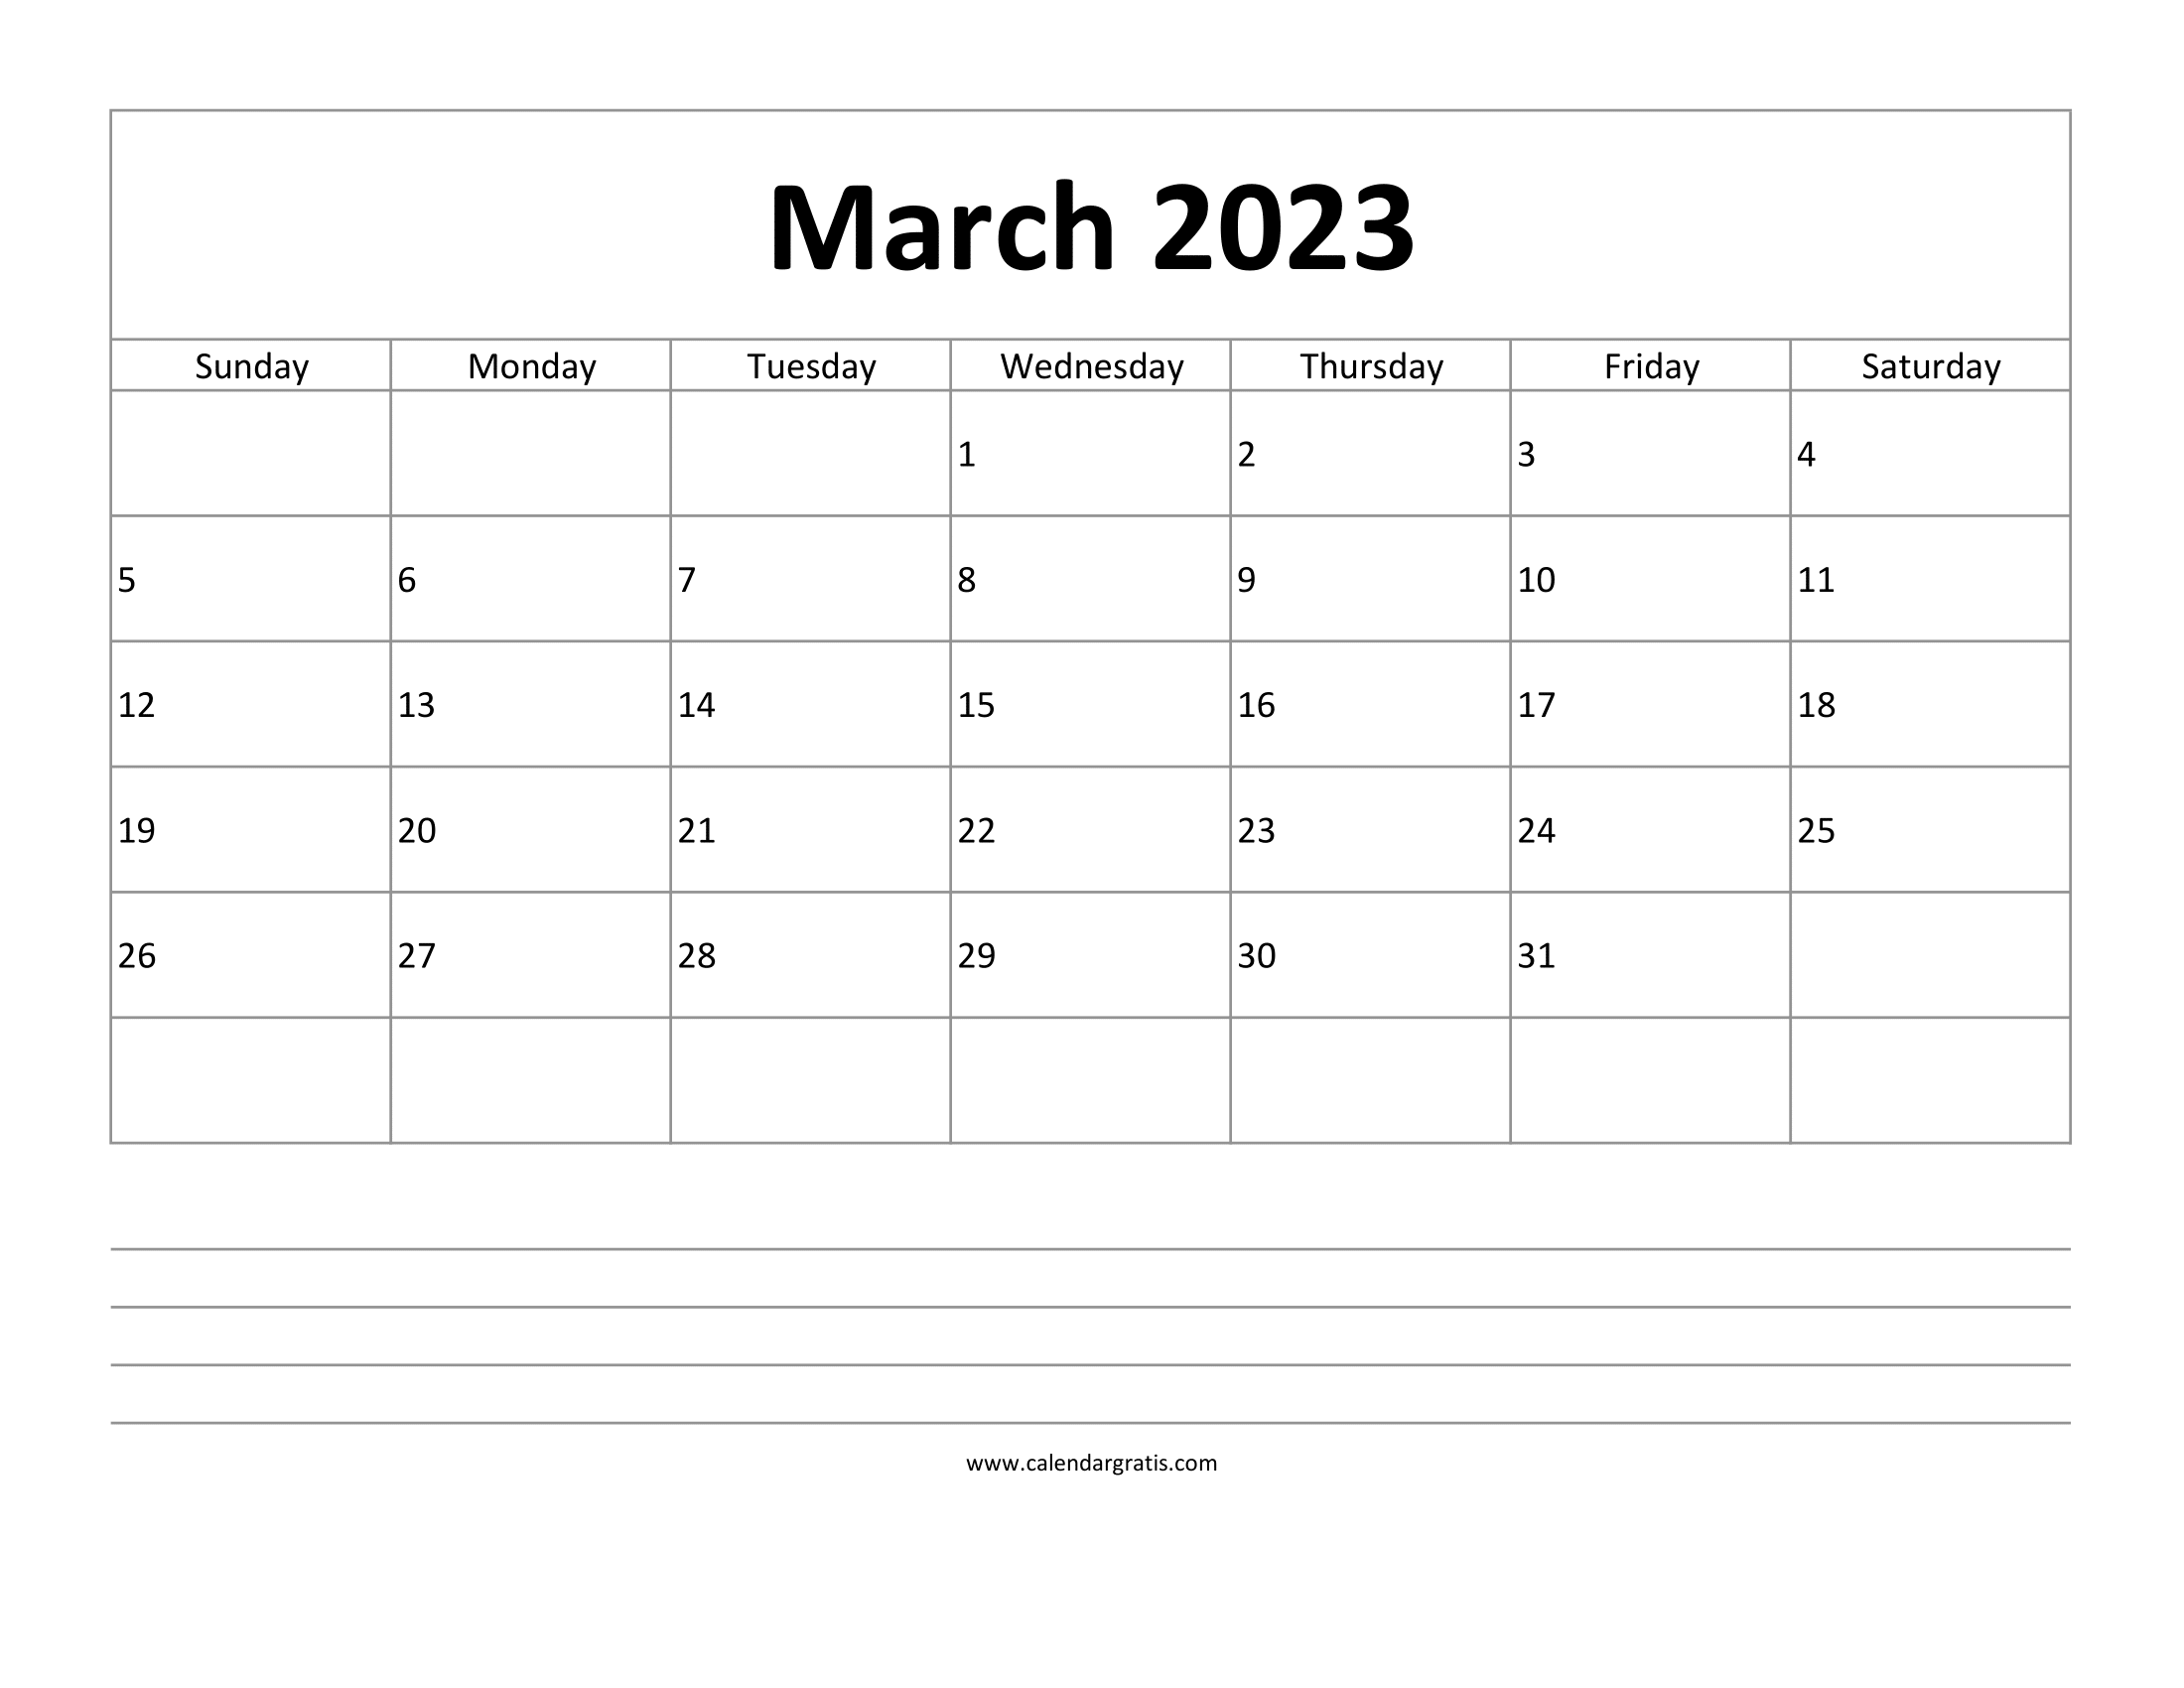 Free printable March 2023 calendar with notes, lines, to-do list, and monthly goal planner.